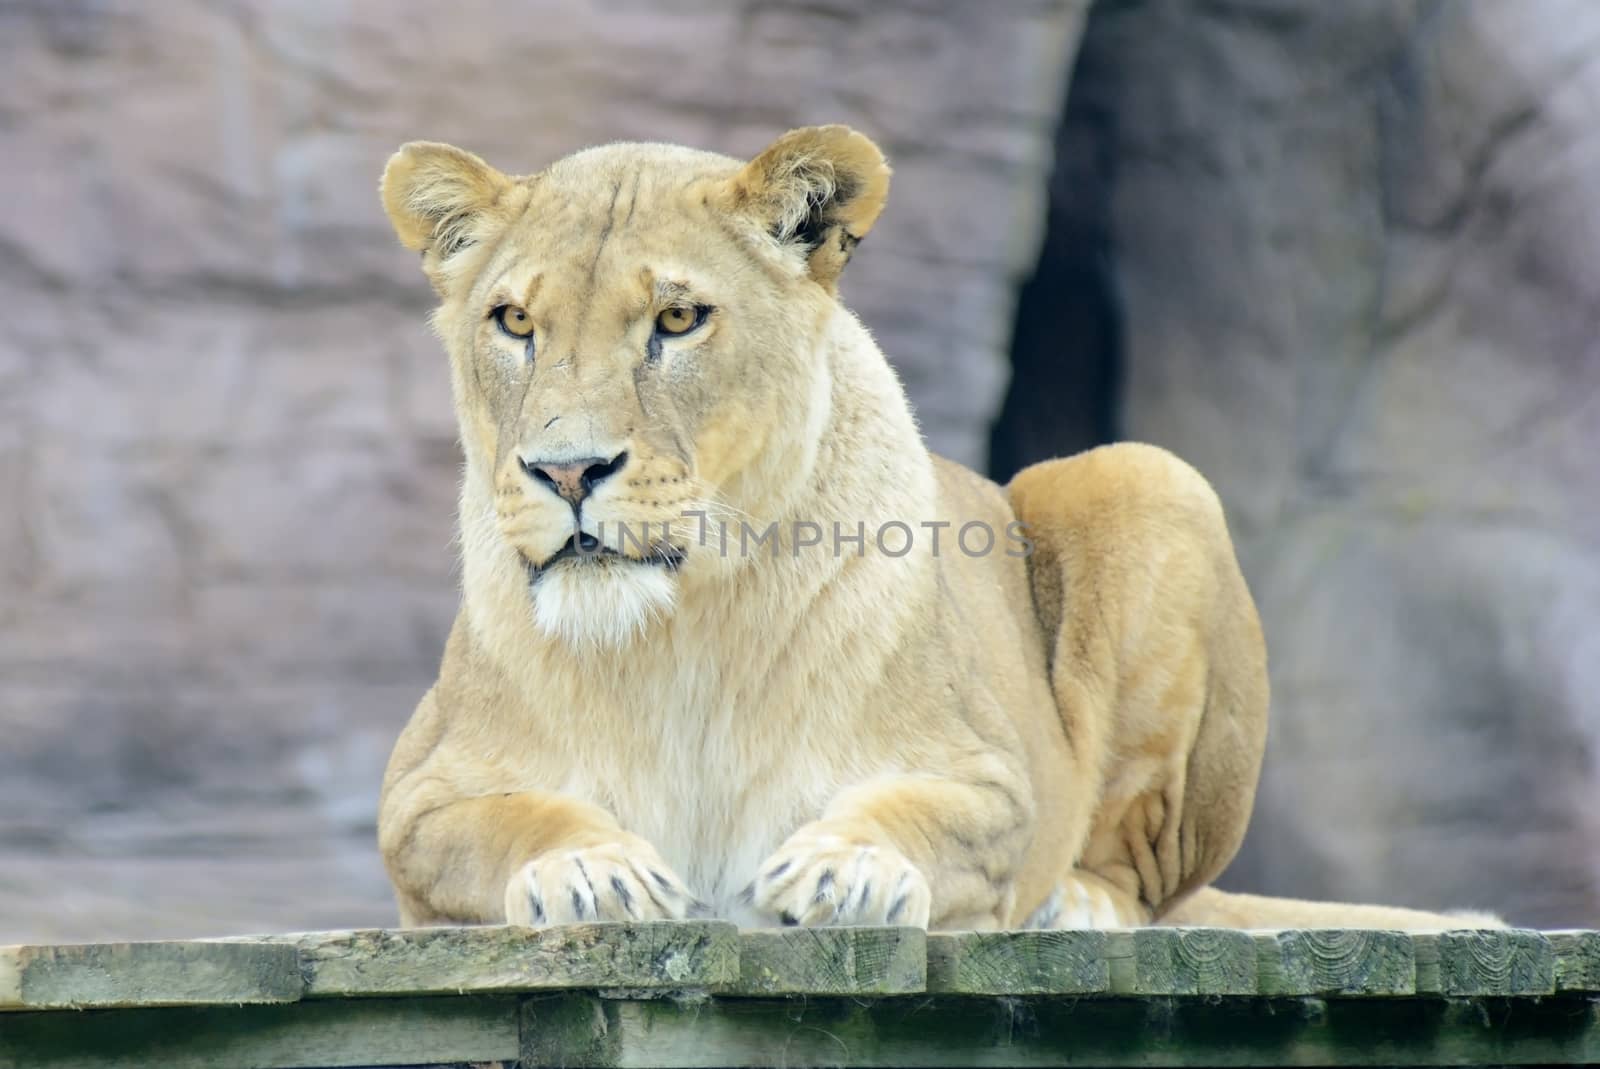 Lioness resting but still looks alert and dnagerous